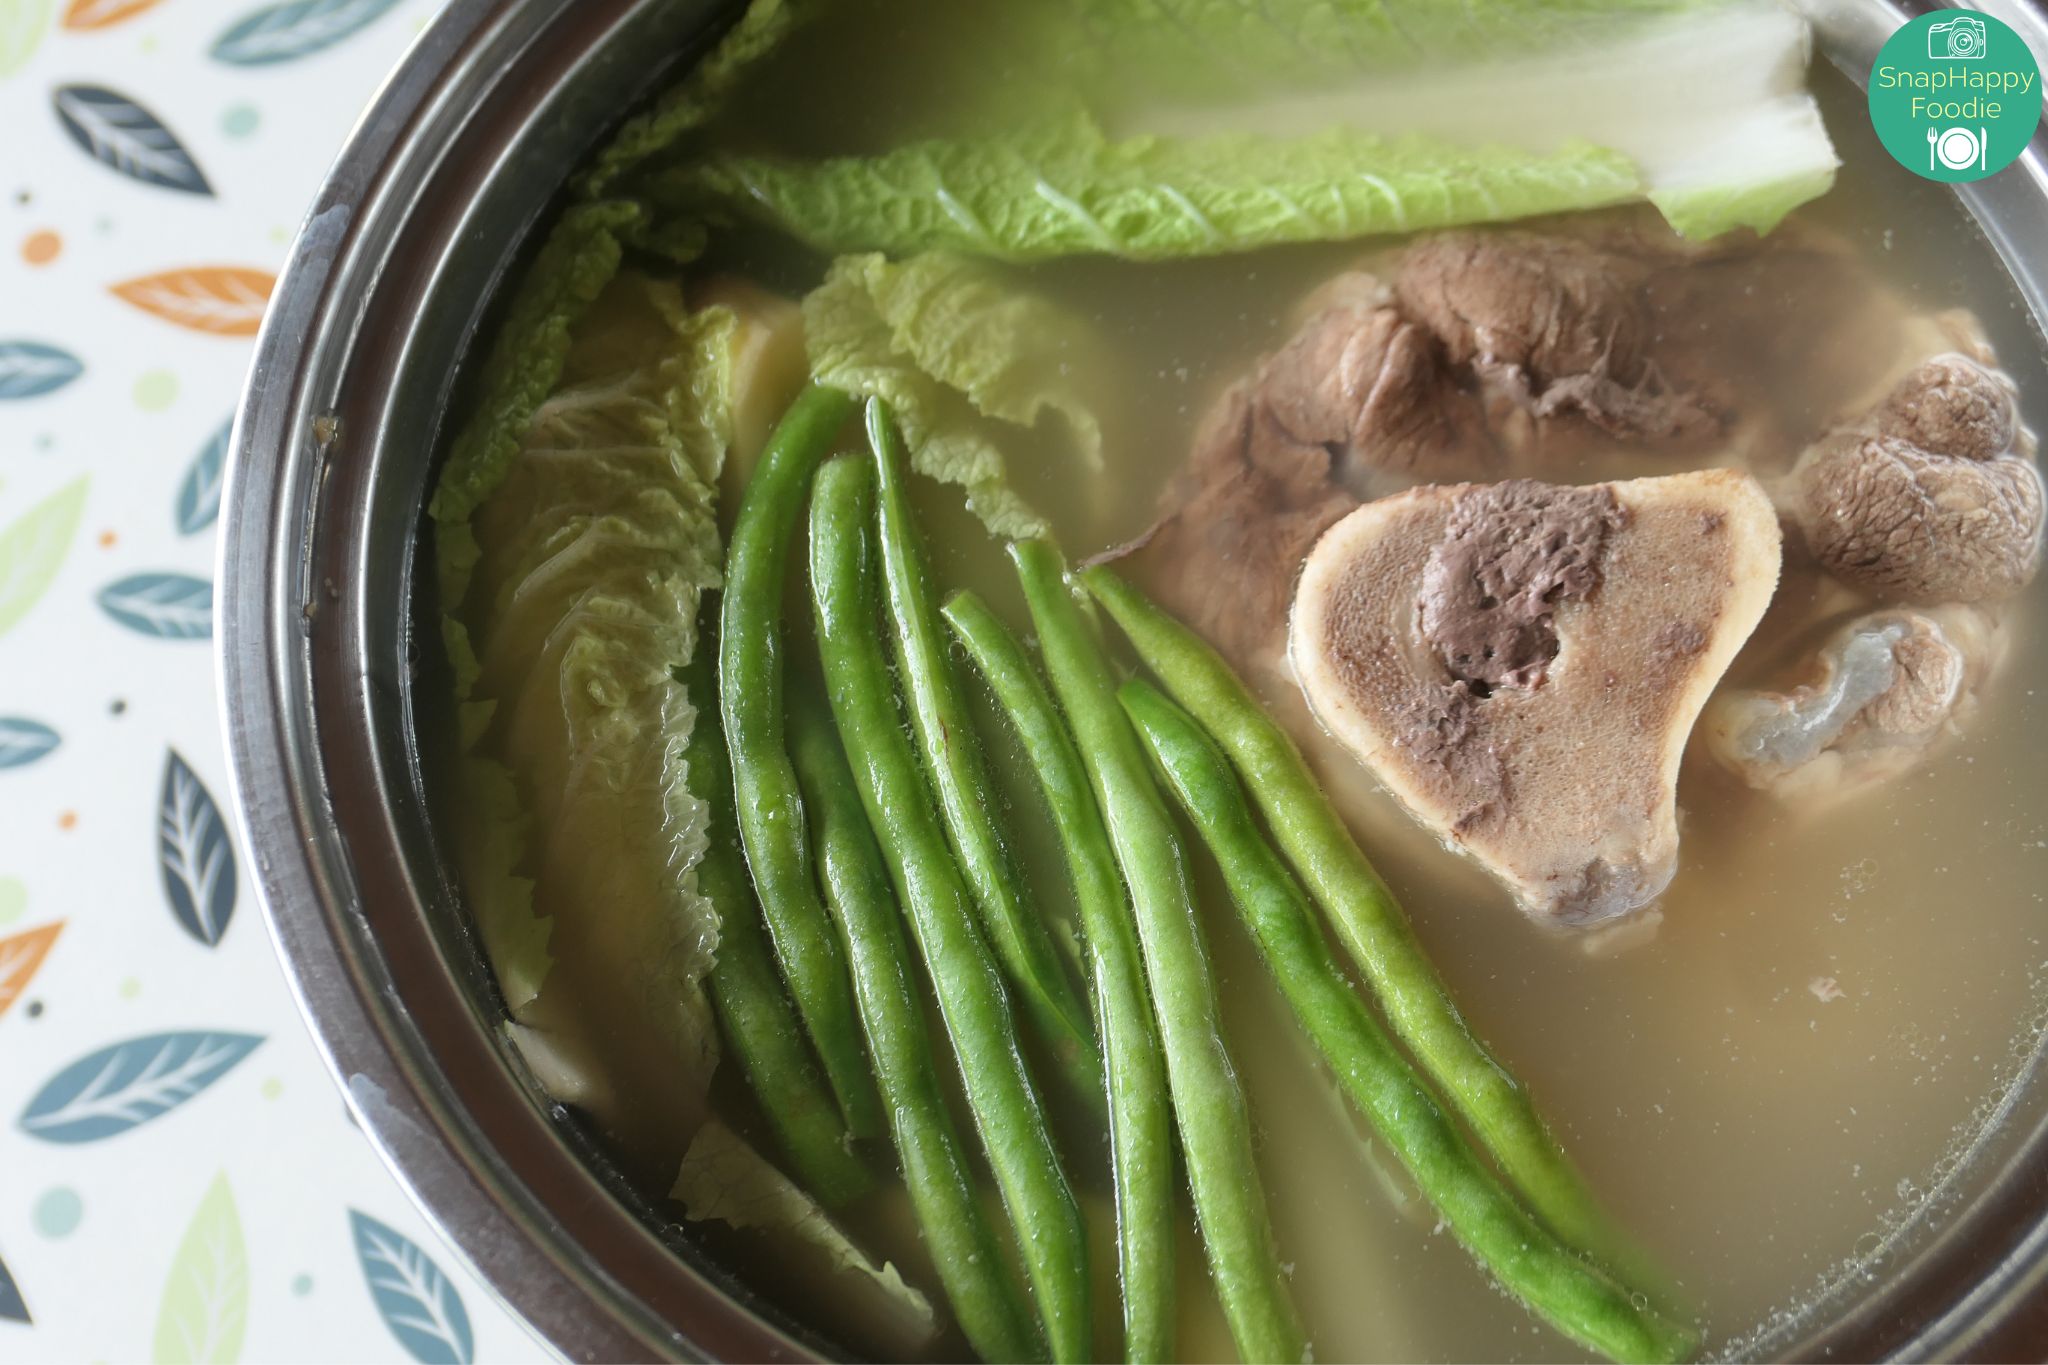 Bulalo - T'Viand Specials - SnapHappy Foodie | www.snaphappyfoodie.com